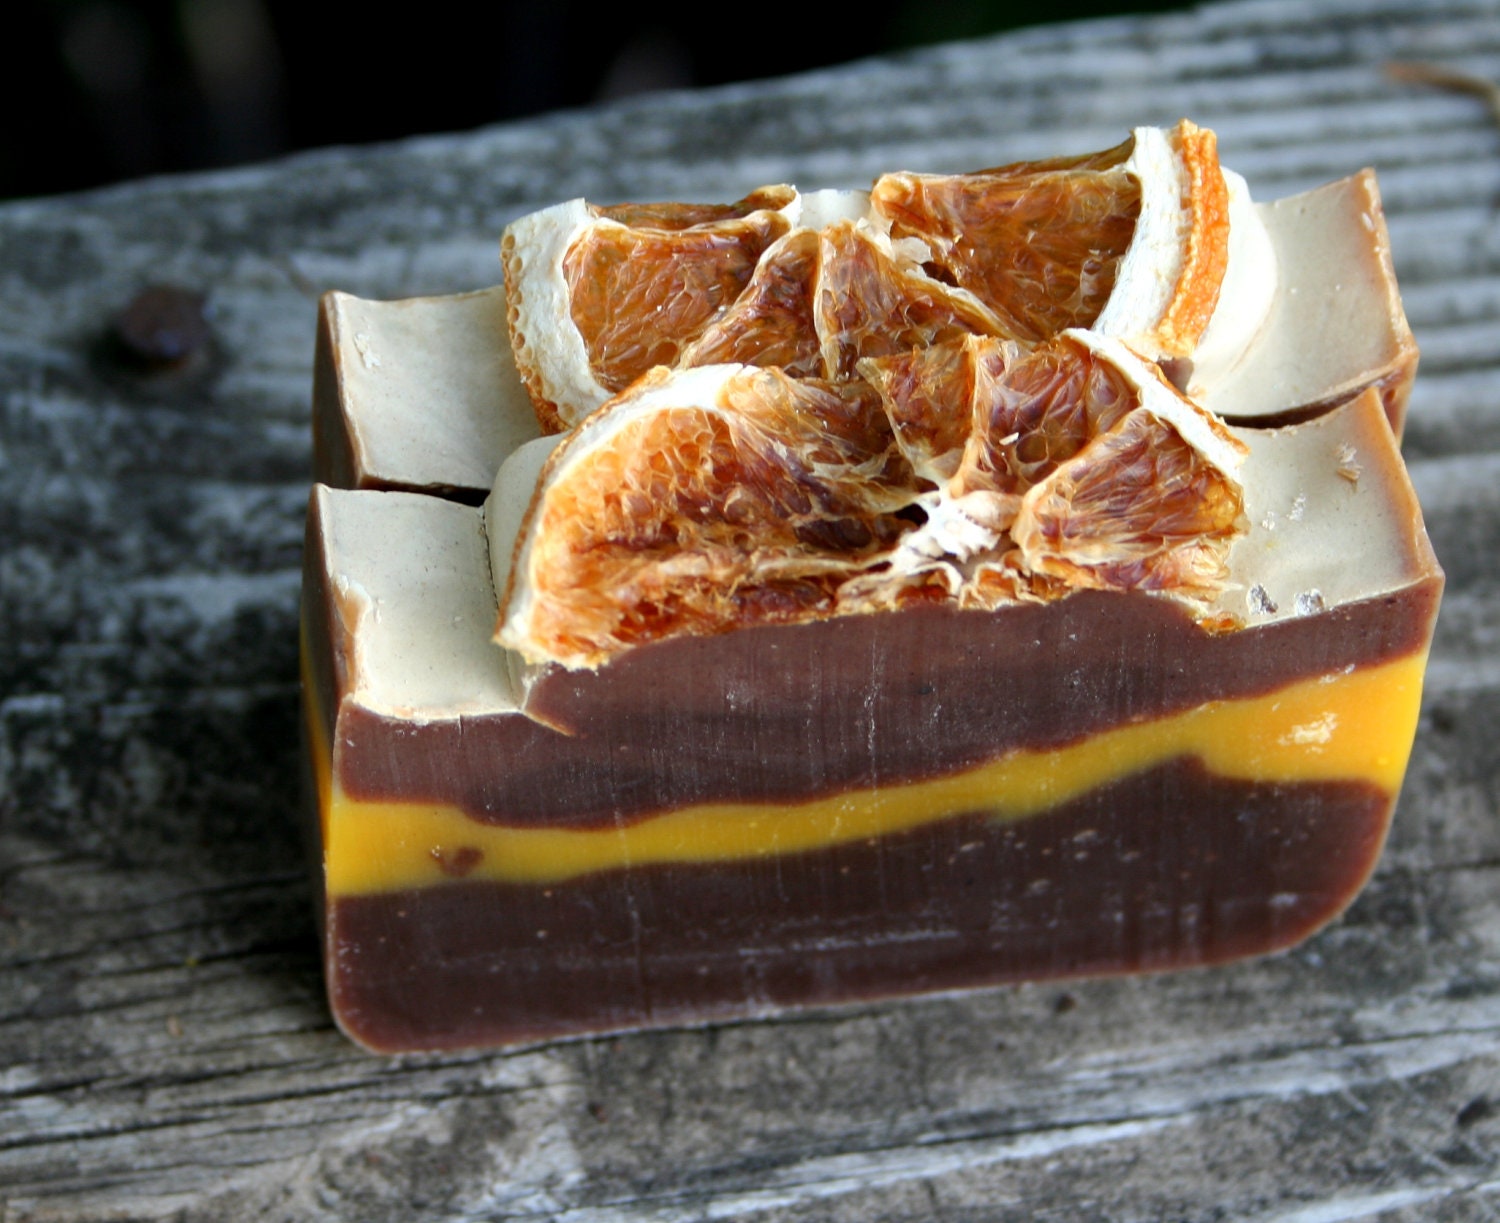 Two bars of soap that look like slices of chocolate orange cake: a half-orange slice on top of a white frosting-looking layer on top of an orange layer between two dark chocolate-colored layers.